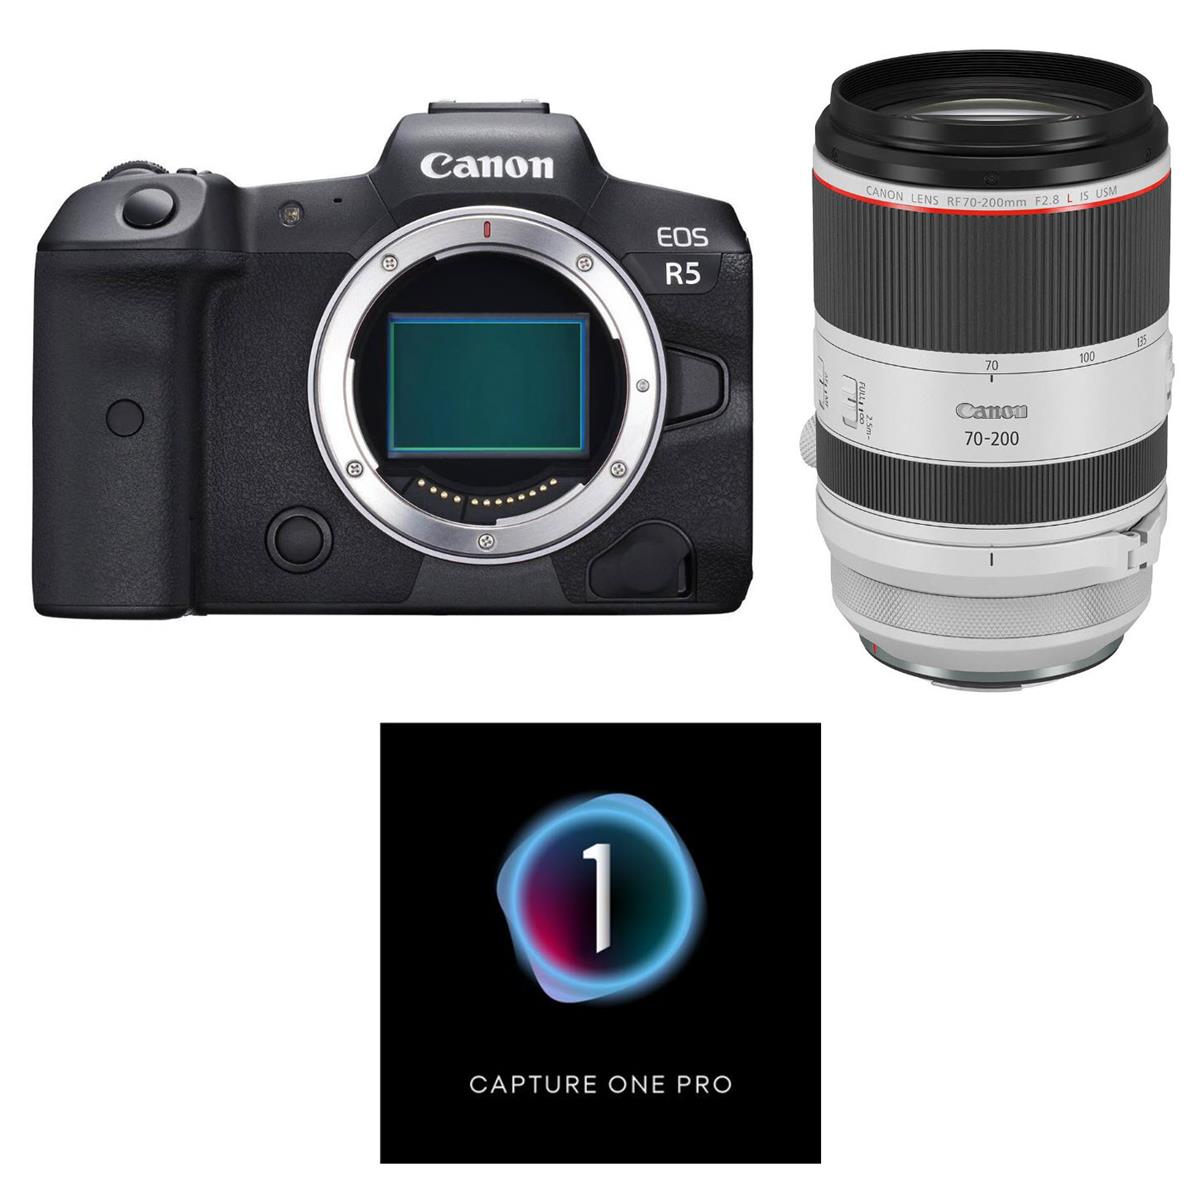 Image of Canon EOS R5 Mirrorless Camera with RF 70-200mm f/2.8L IS USM Lens w/Capture One